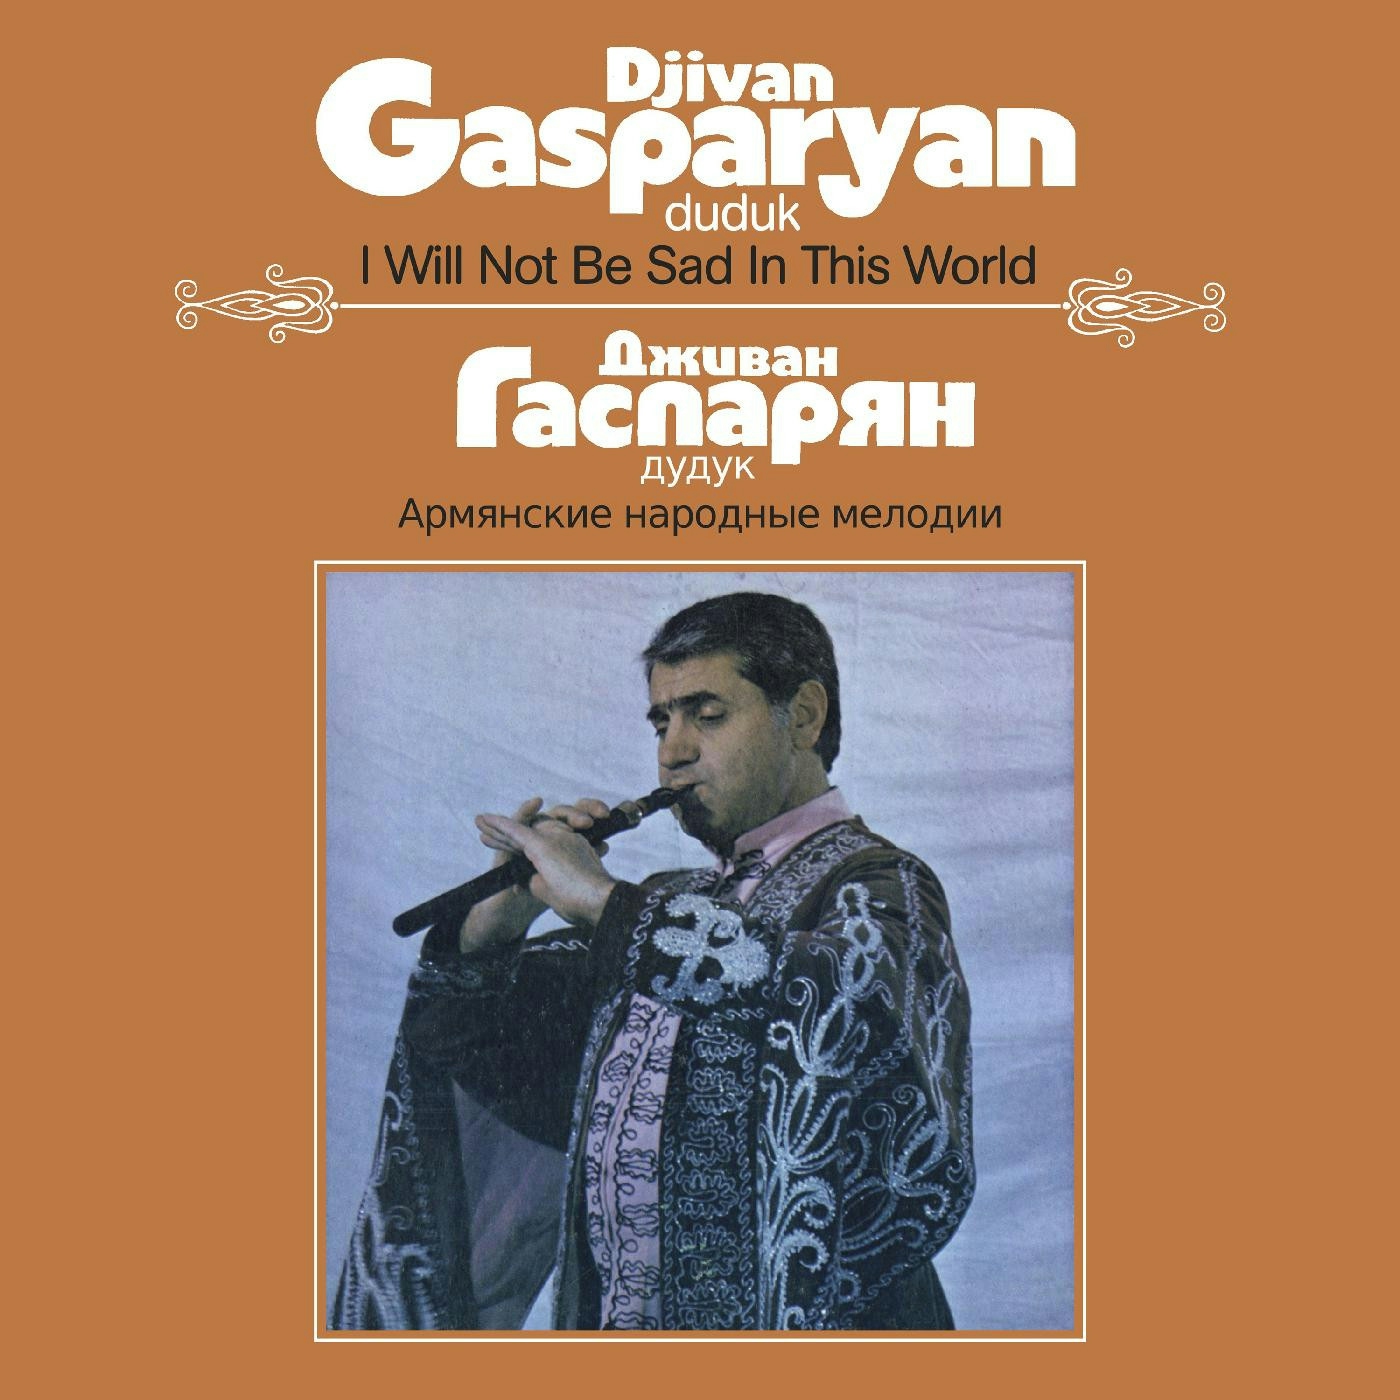 Album artwork for I Will Not Be Sad In This World by Djivan Gasparyan